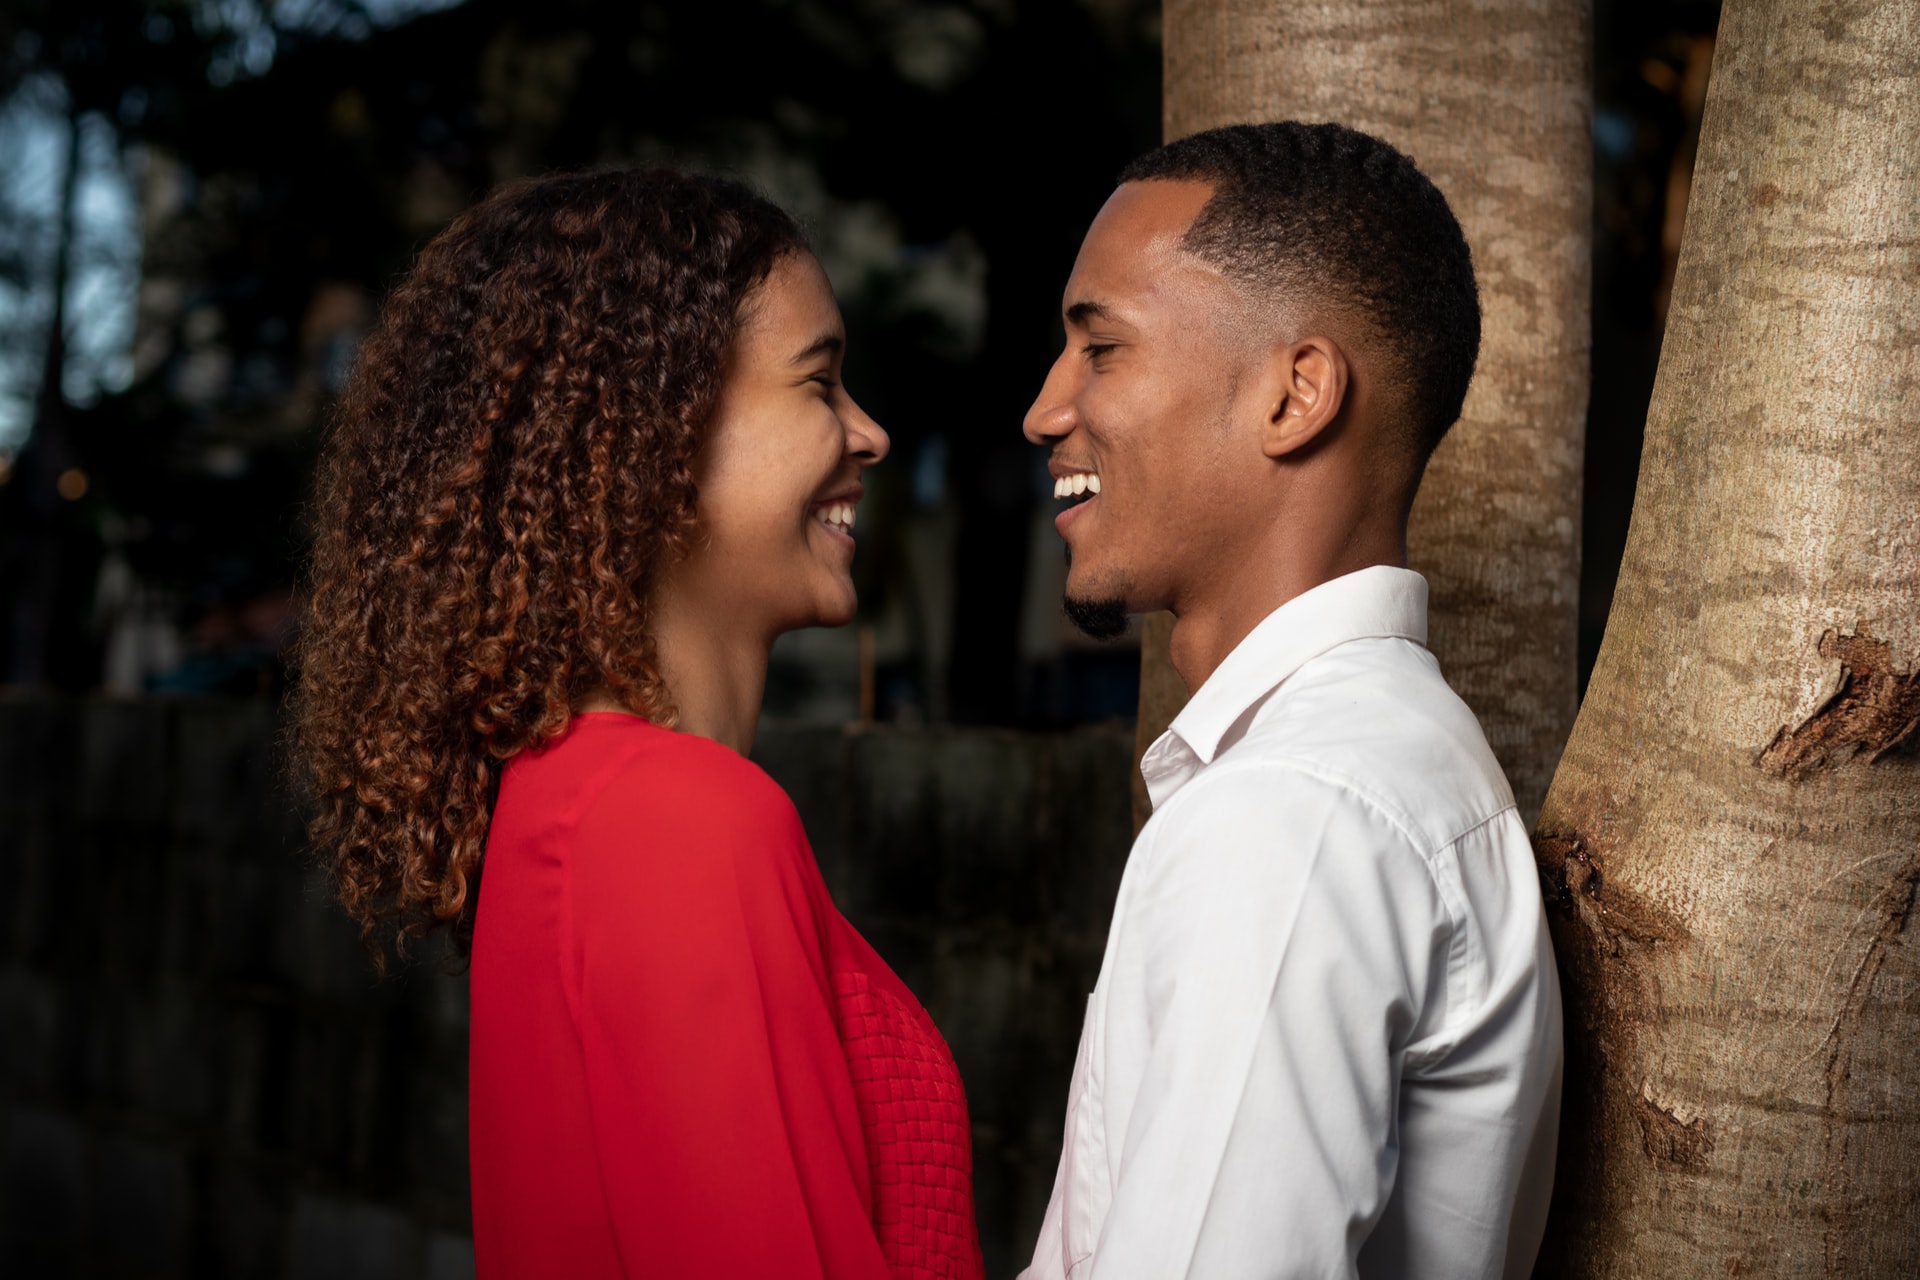 What You Need To Know Before Joining a Black Dating Site